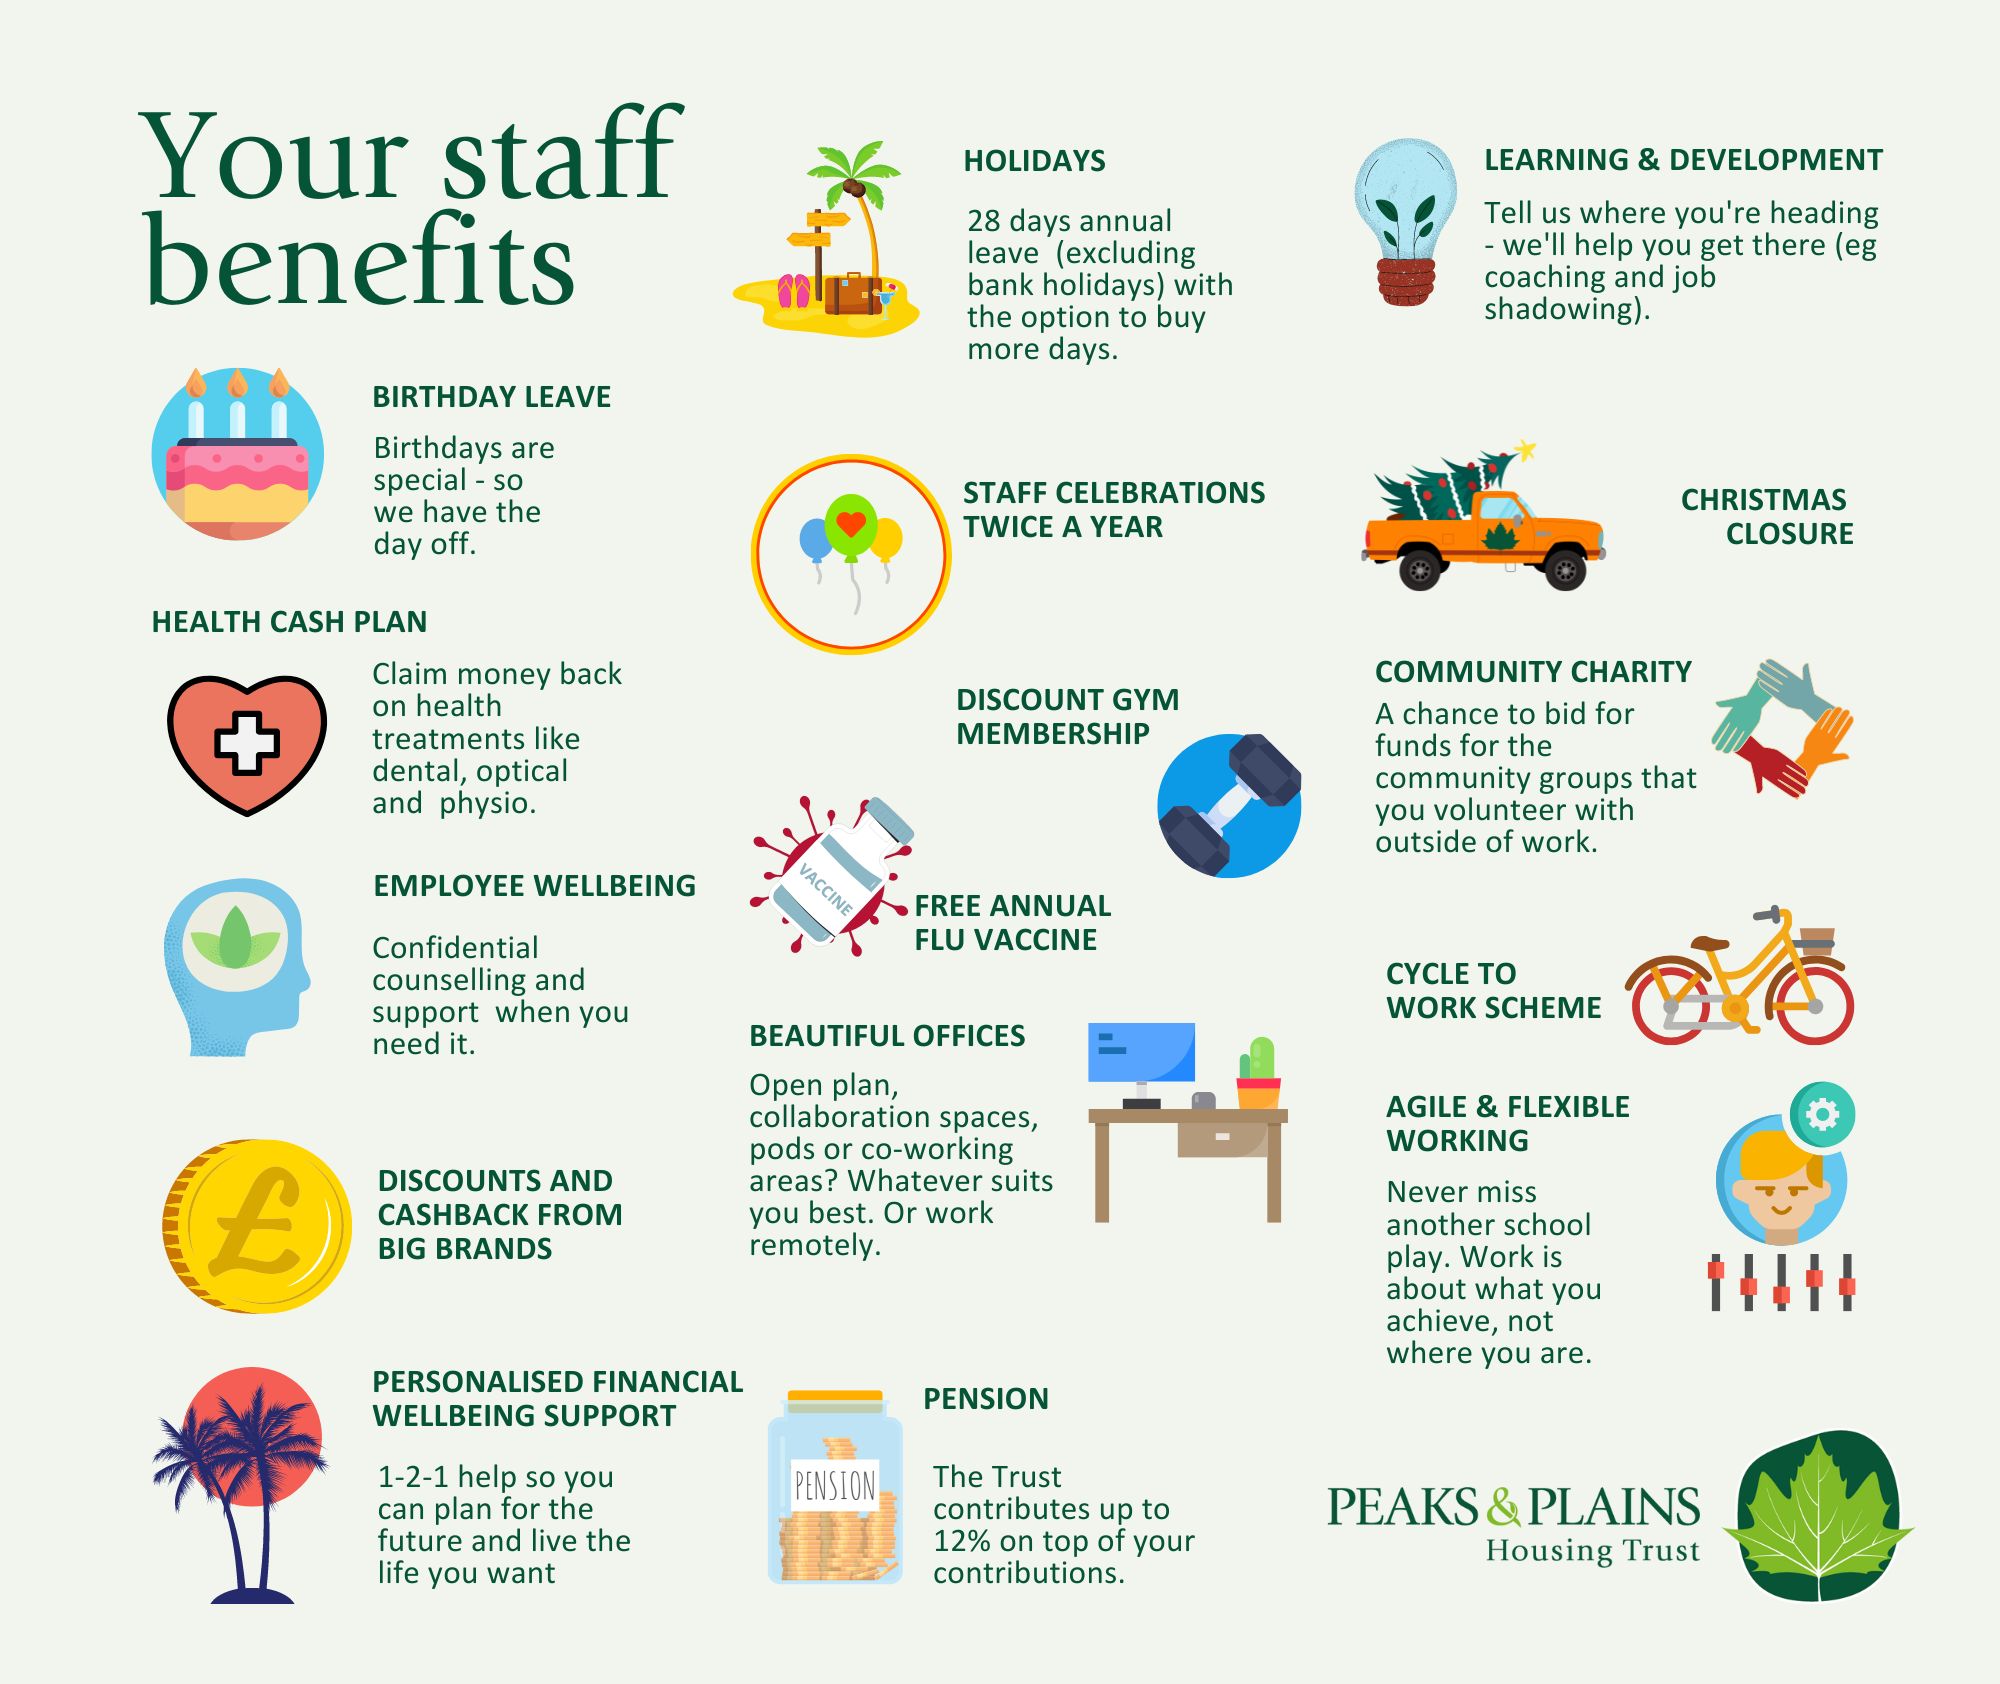 A graphic summarising the benefits at the Trust